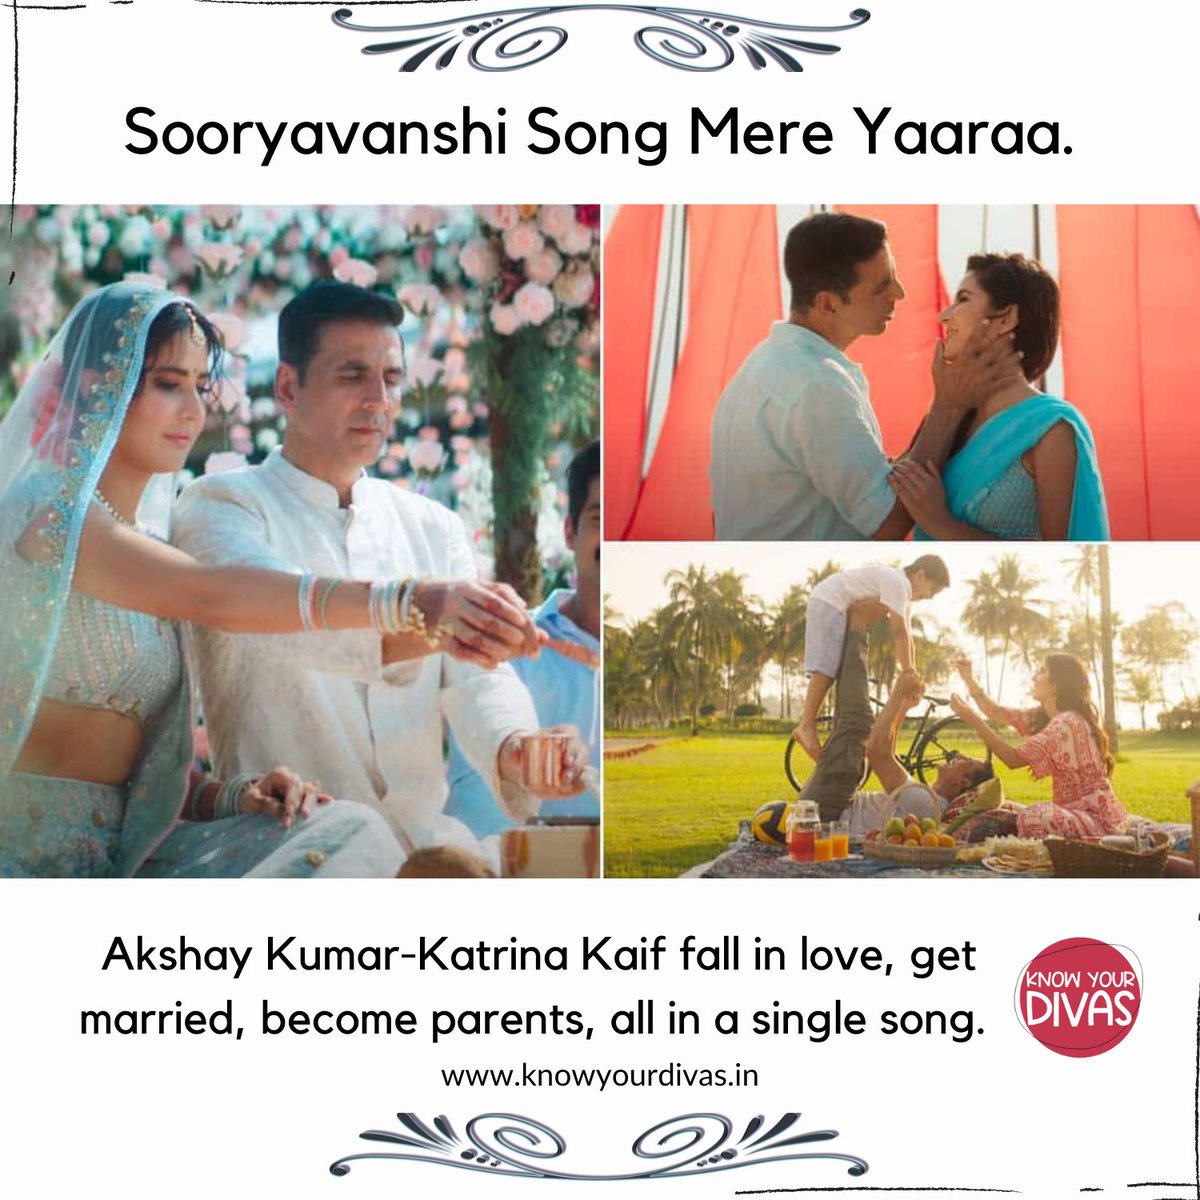 Sooryavanshi Song 'Mere Yaaraa'  Akshay Kumar-Katrina Kaif fall in love, get married, become parents, all in a single song.
.
.
For more details visit- knowyourdivas.in
.
#sooryavanshi #song #mereyaraa #akshaykumar #katrinakaif #love #merried #parents #divas #knowyourdivas